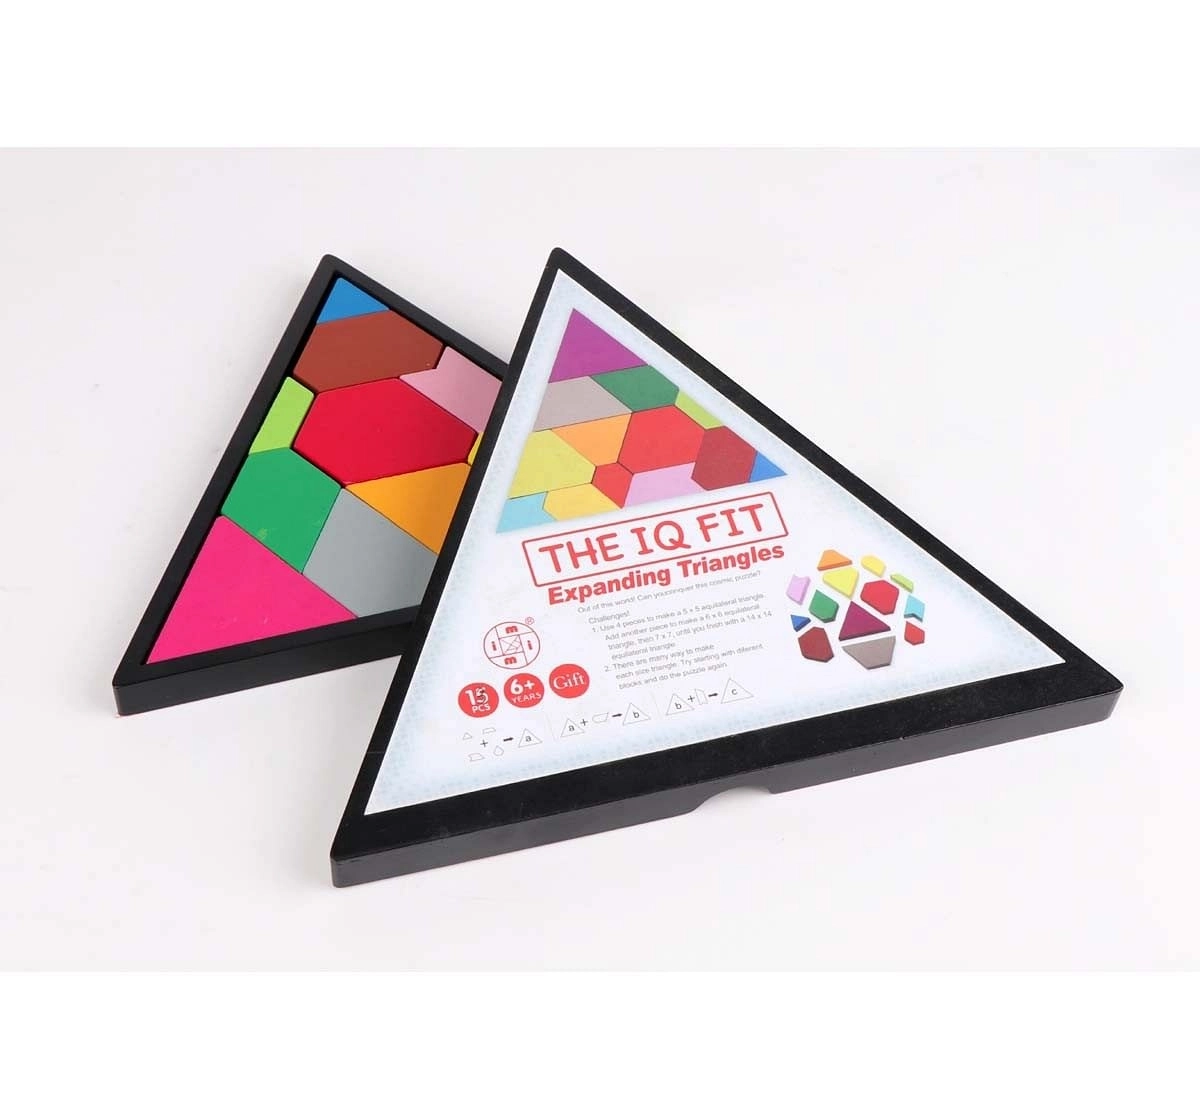 Mimi IQ Fit Expanding Triangles Games for Kids Age 6Y+